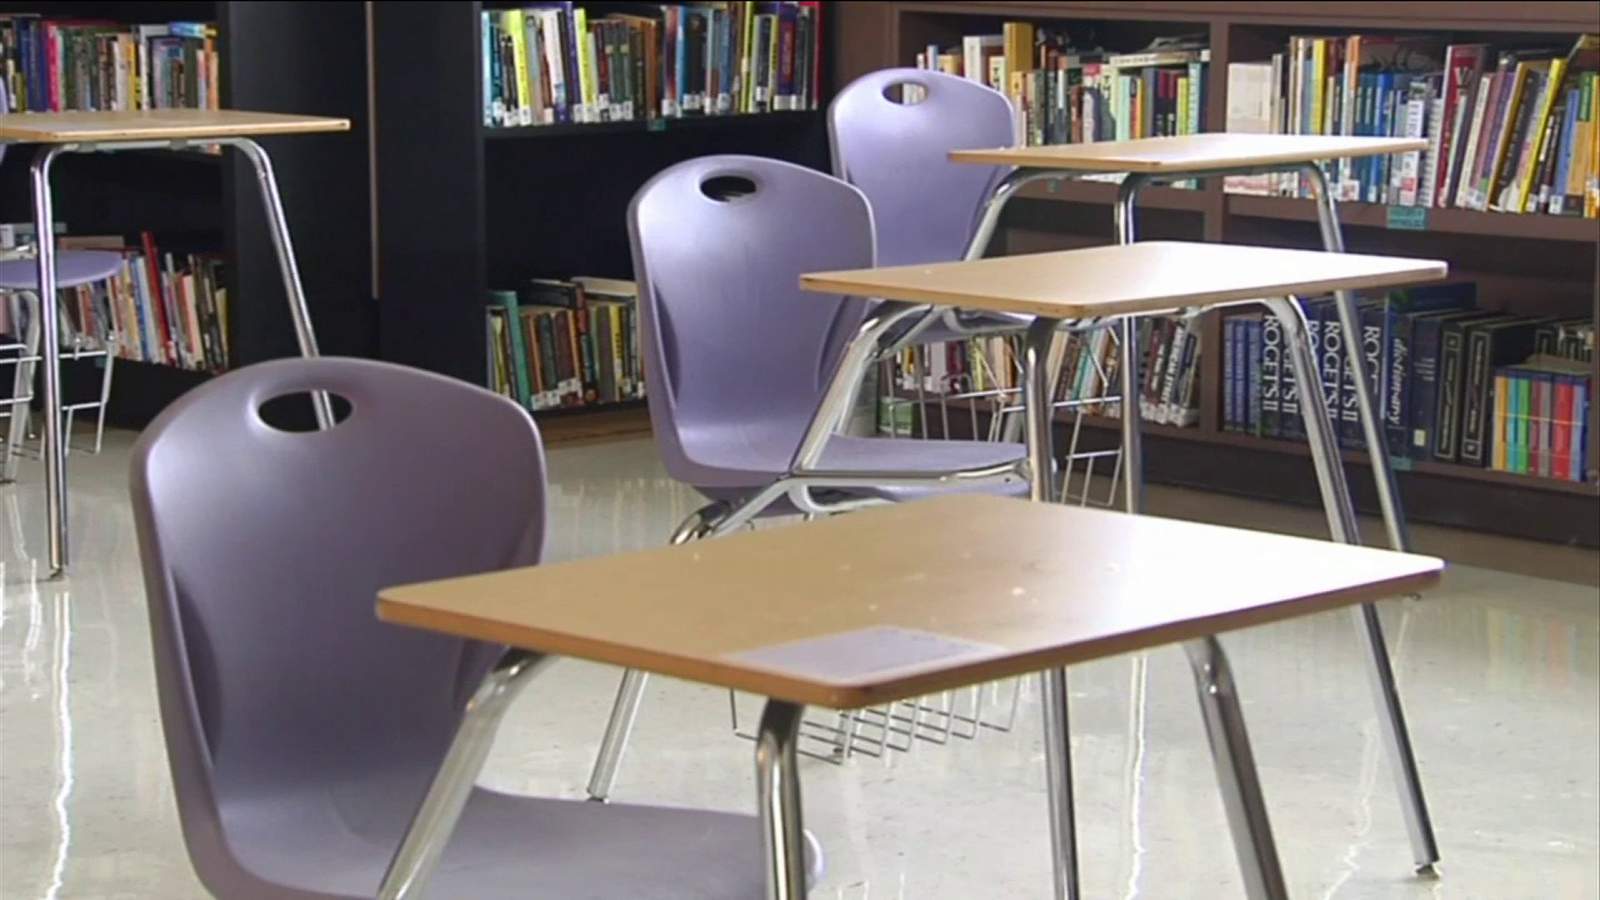 Statewide testing begins in Florida schools with pandemic protocols in place